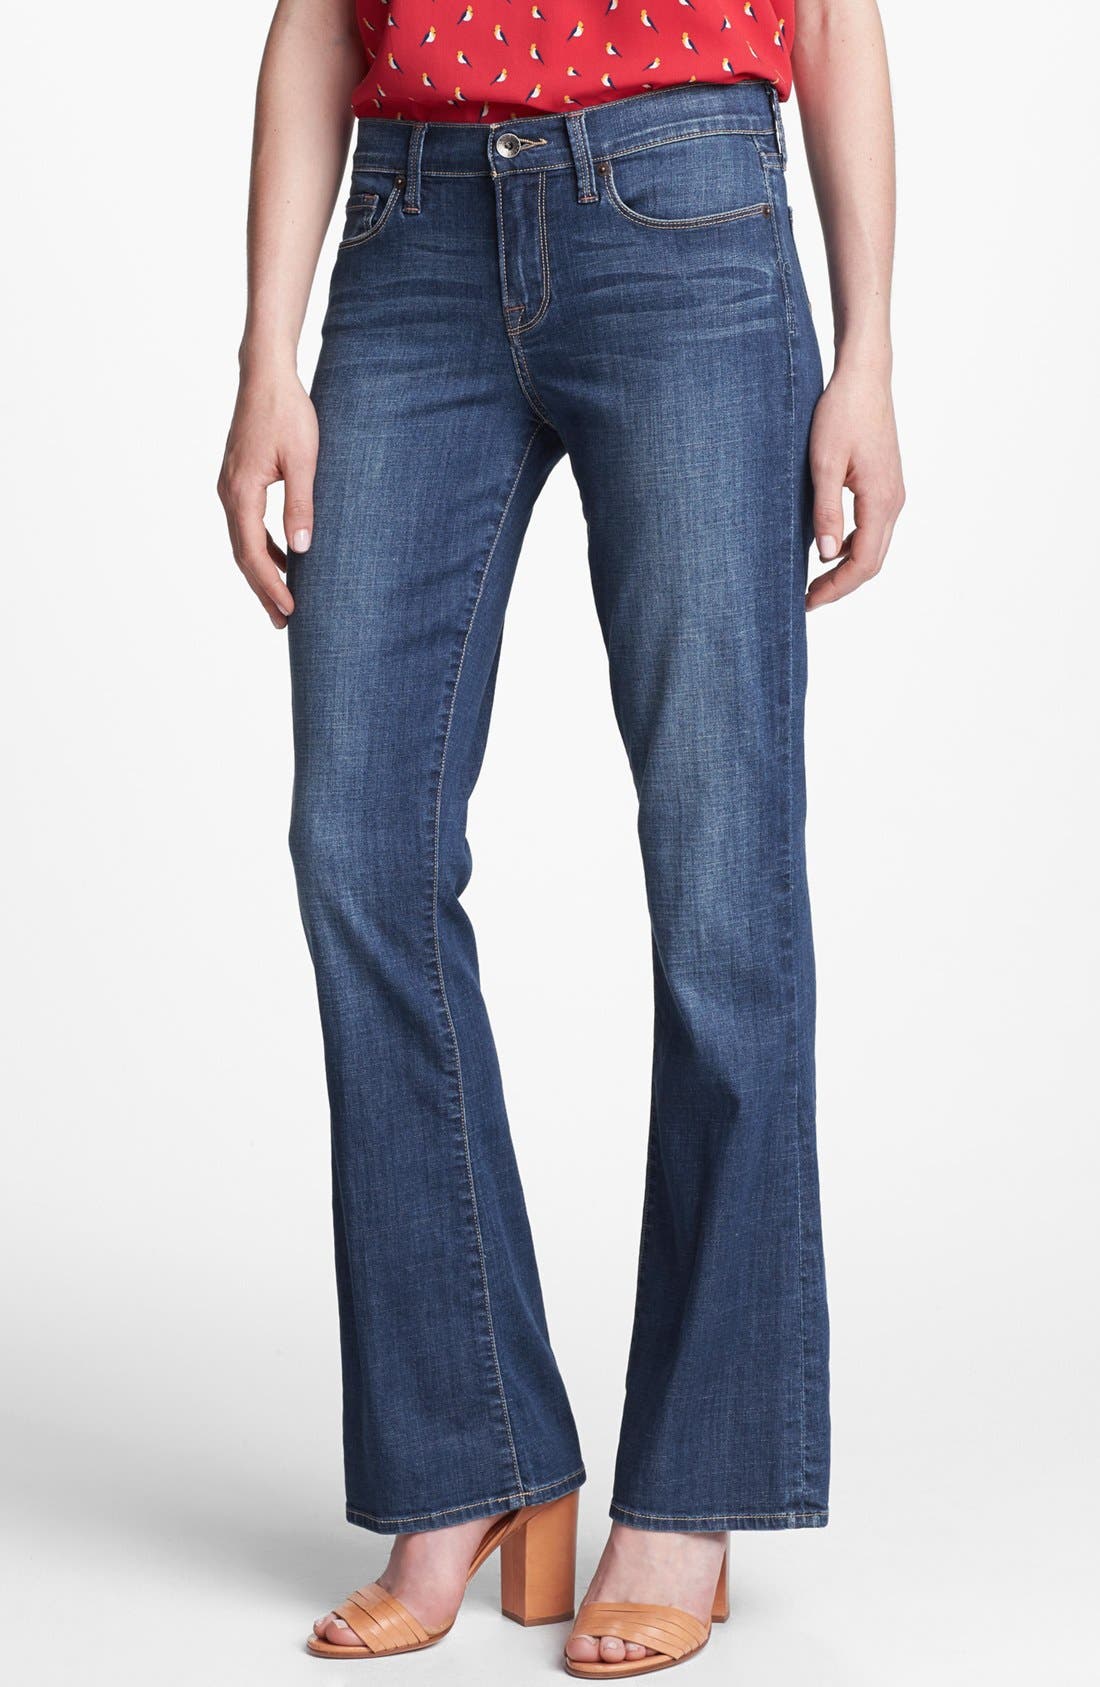 lucky brand sofia boot jeans